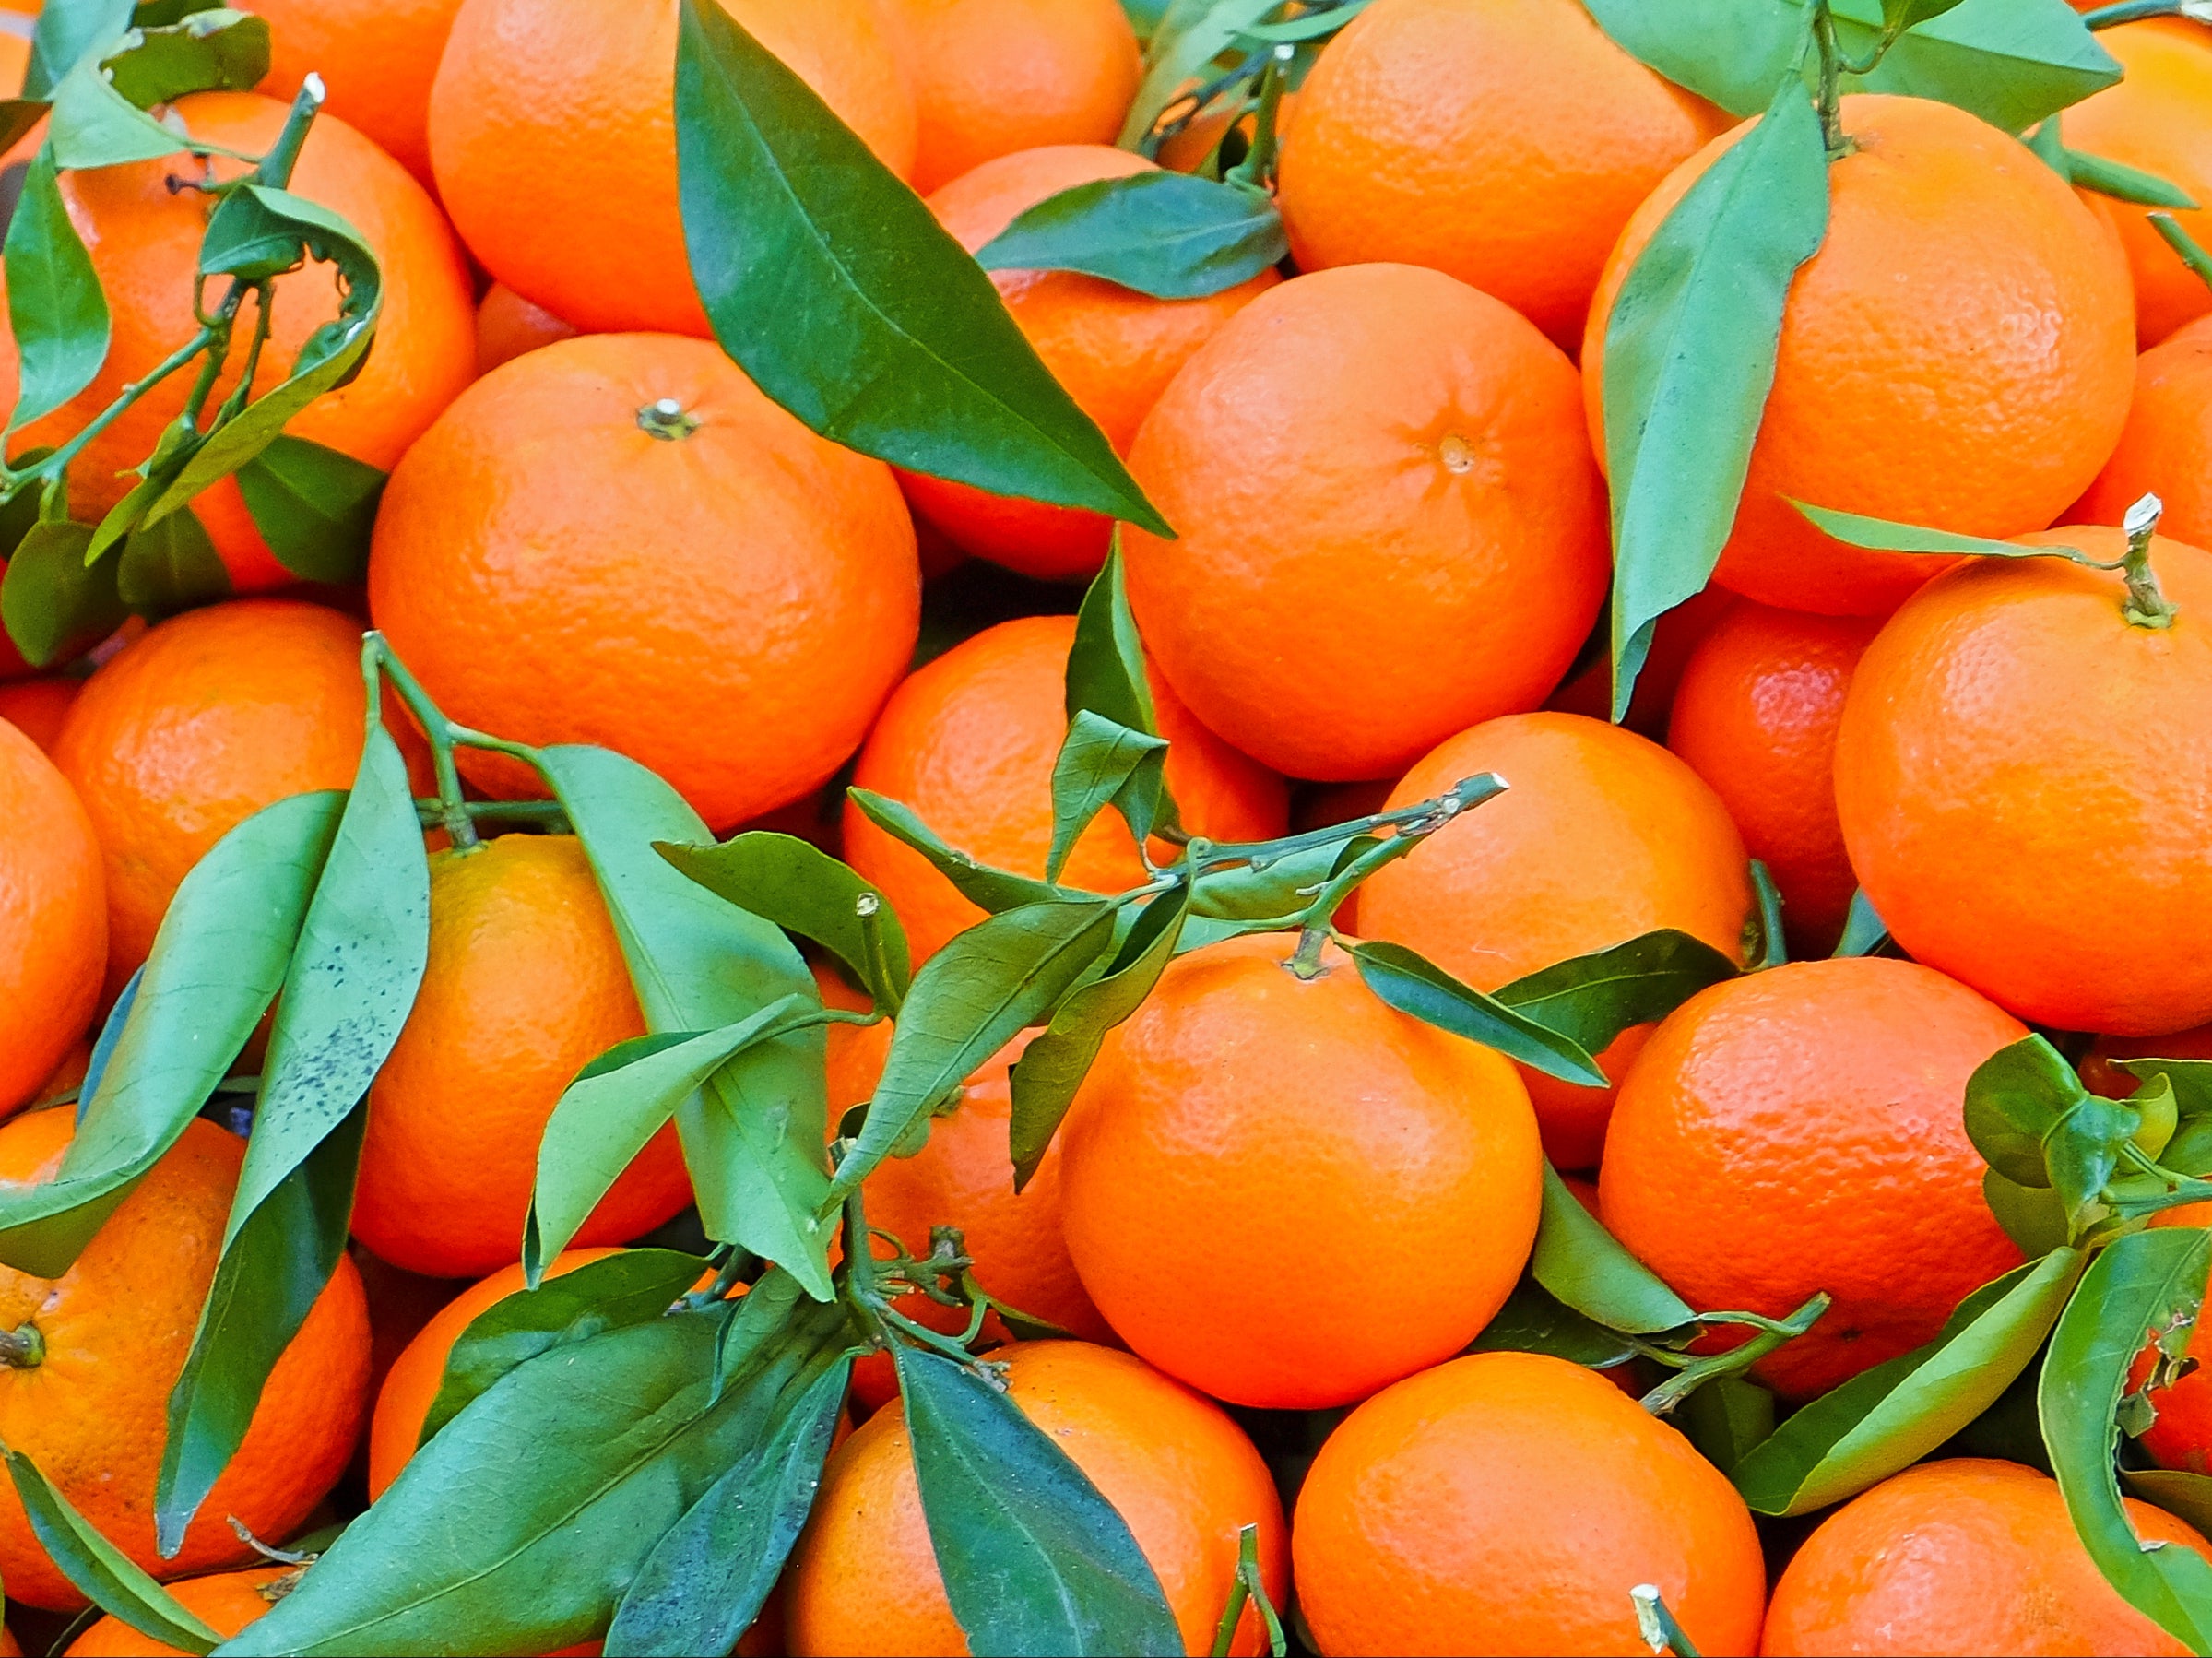 Oranges are often coated with wax containing insect resins to ensure they last longer on supermarket shelves